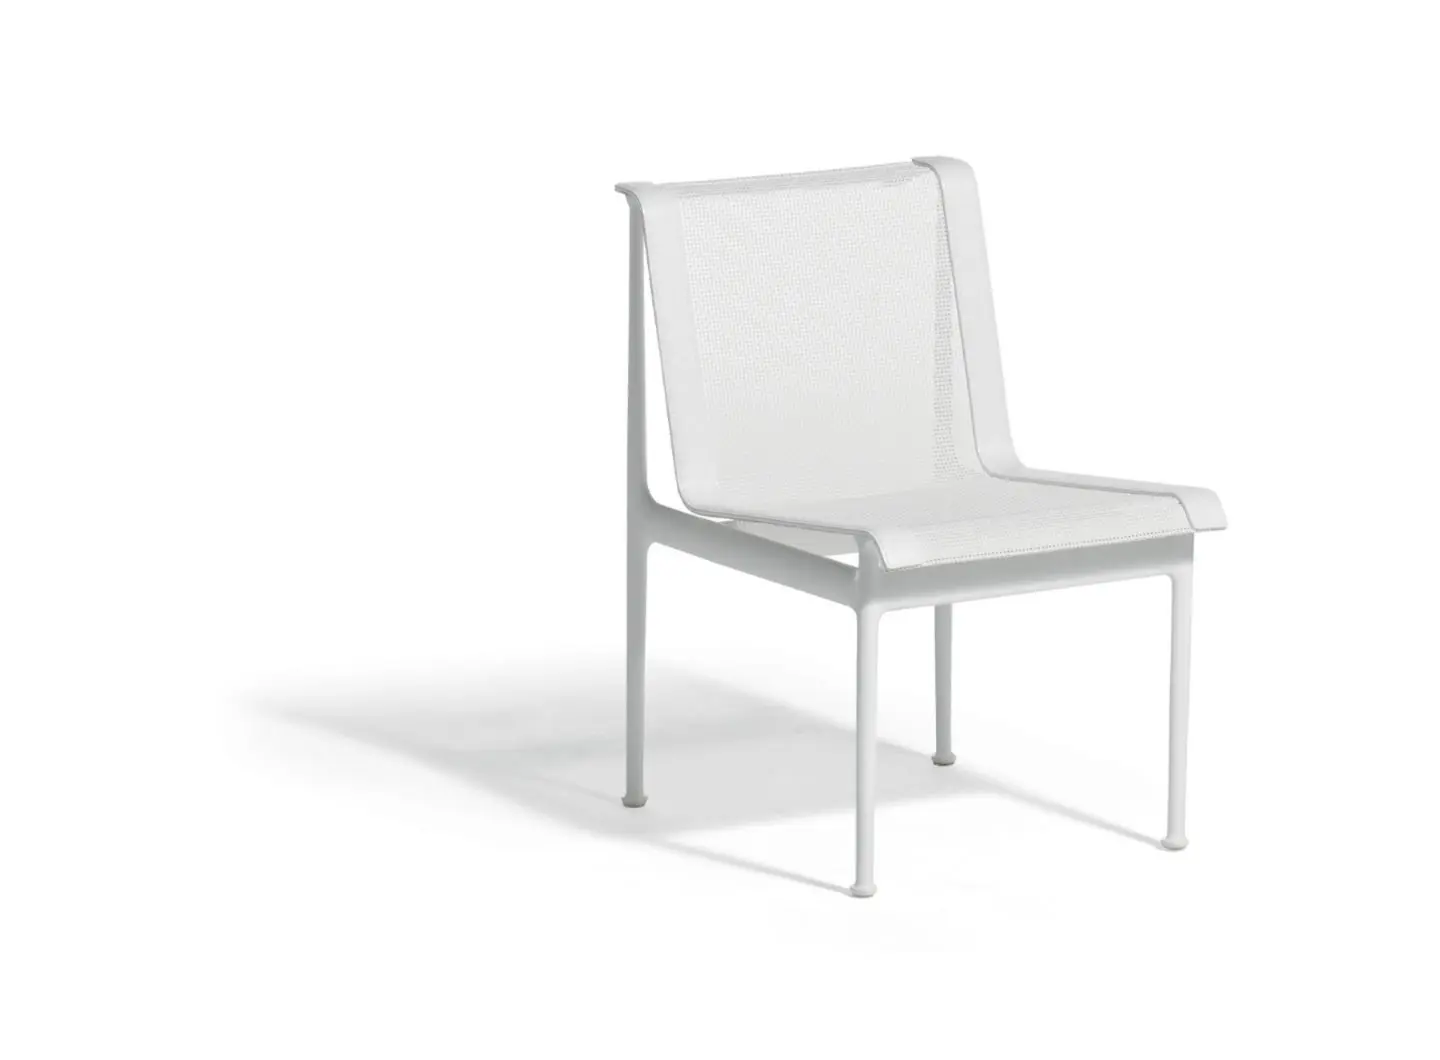 Knoll_1966 Dining Chair by Richard Schultz